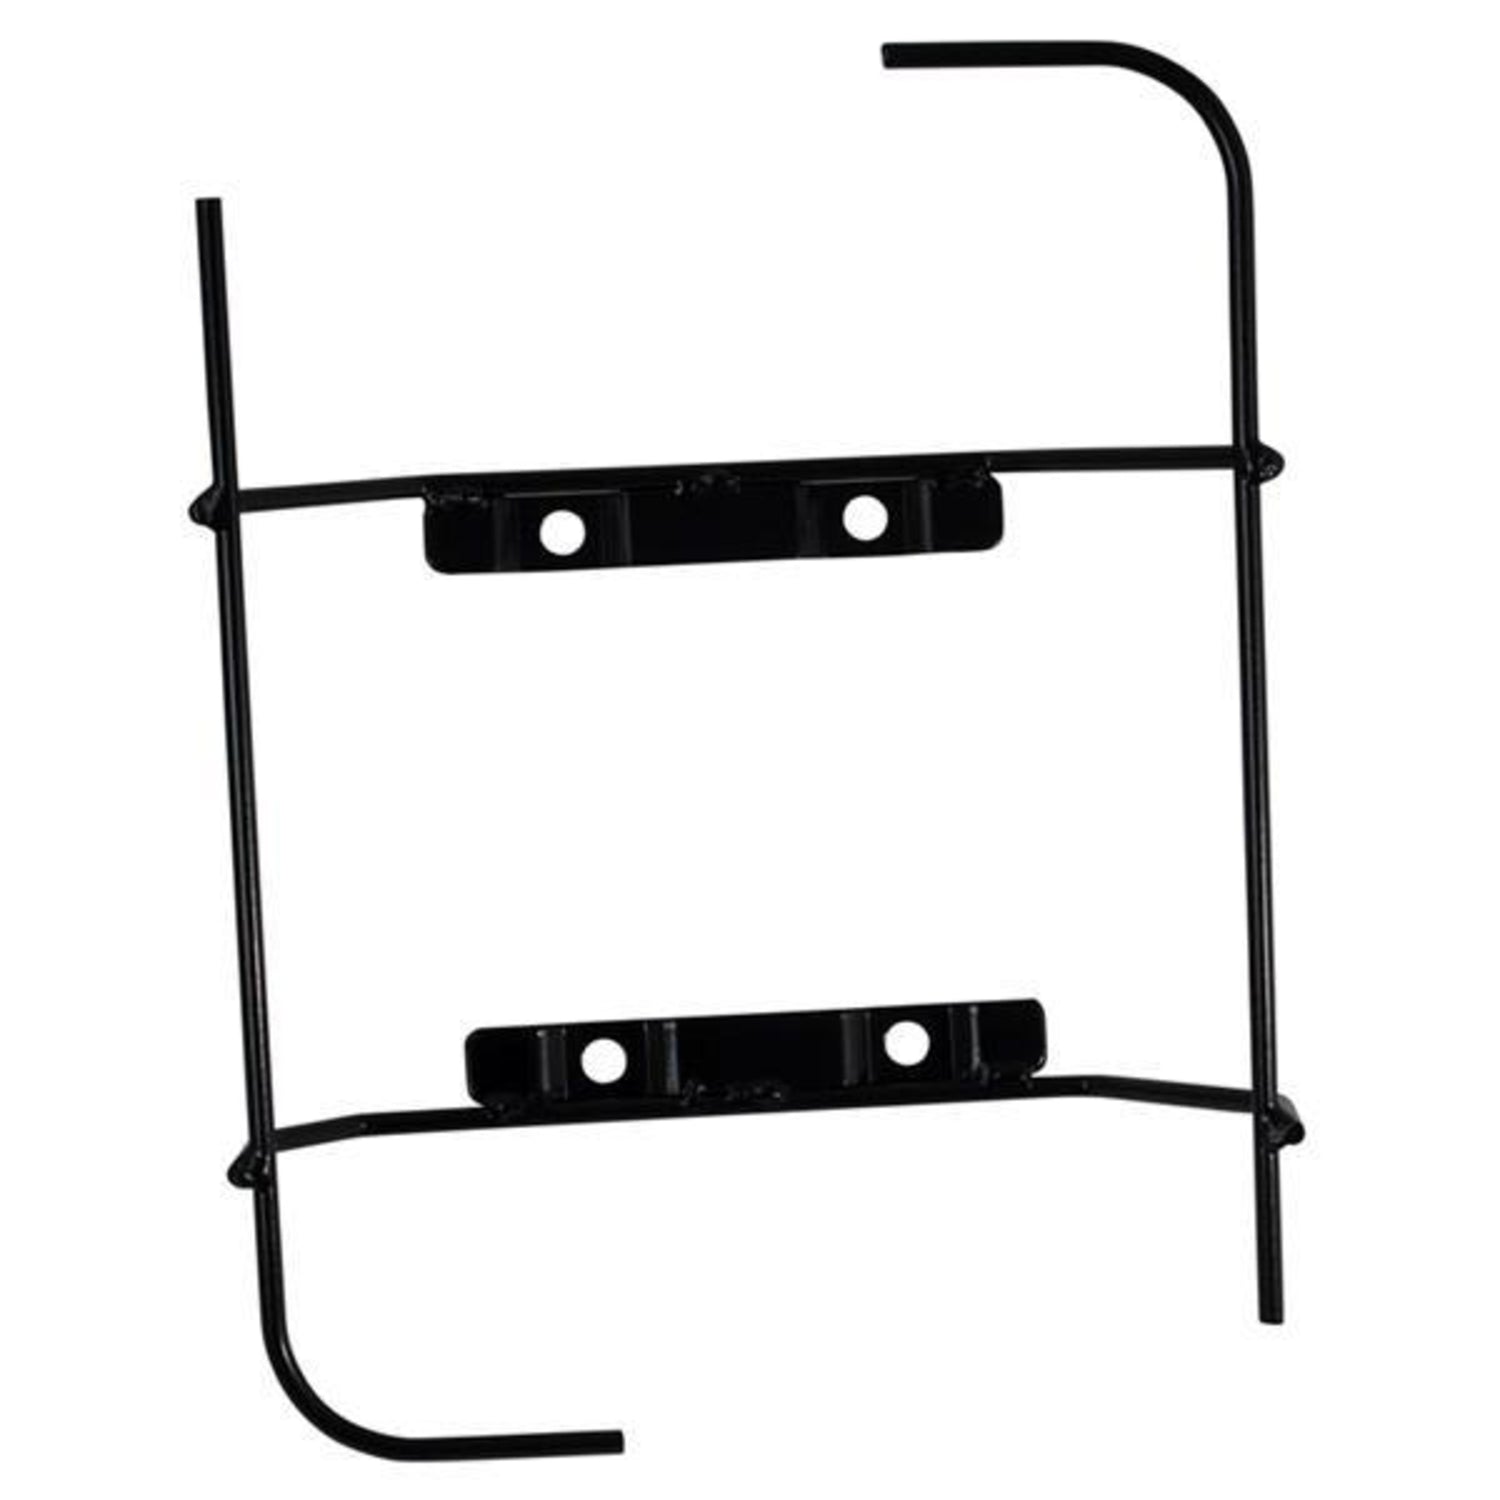 E-Z-GO RXV Cooler Mounting Bracket (Years 2008-Up)